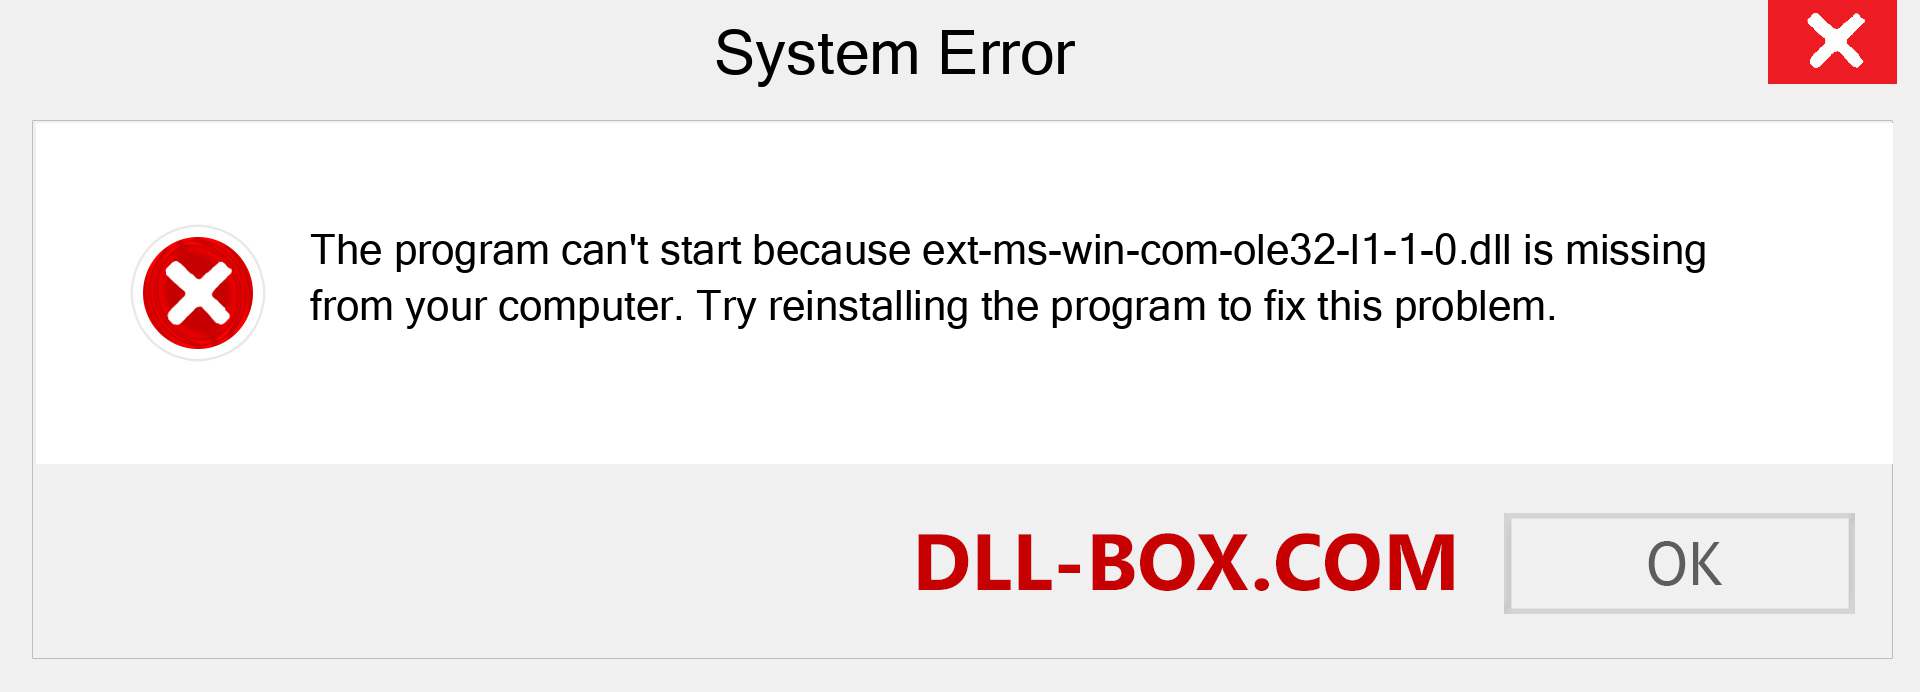  ext-ms-win-com-ole32-l1-1-0.dll file is missing?. Download for Windows 7, 8, 10 - Fix  ext-ms-win-com-ole32-l1-1-0 dll Missing Error on Windows, photos, images